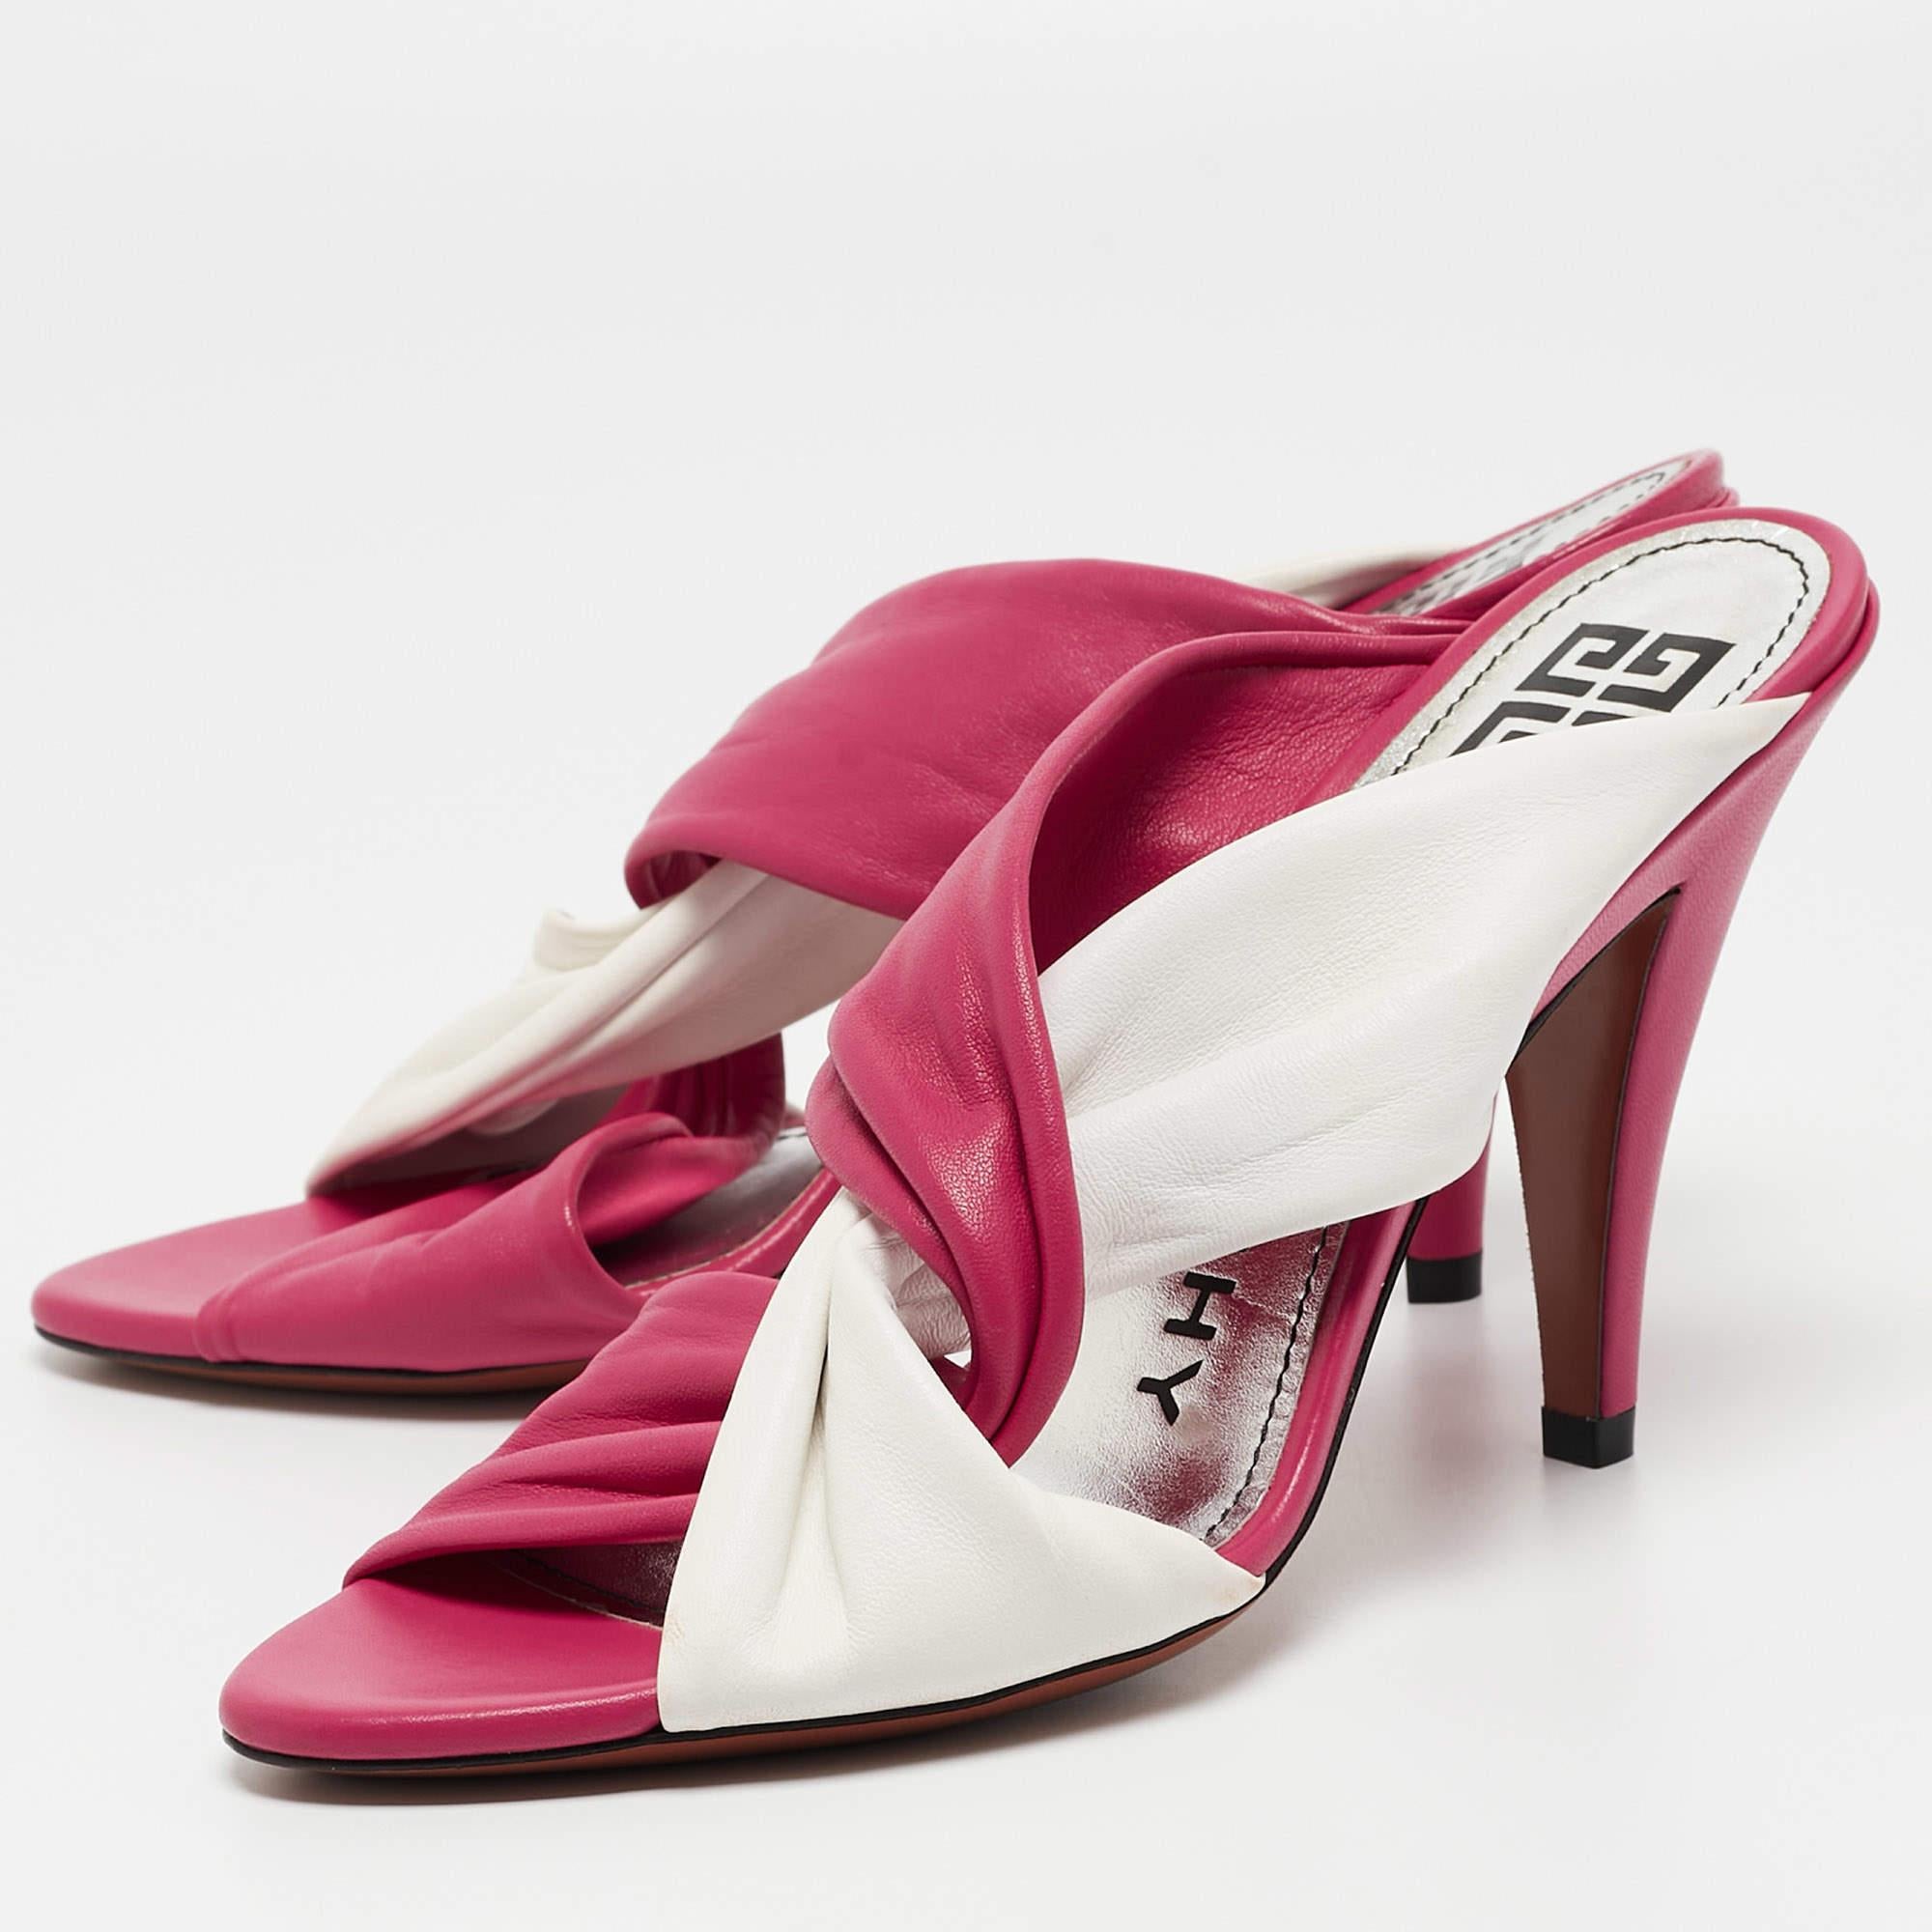 Givenchy Pink/White Leather Slide Sandals Size 36.5 In Excellent Condition For Sale In Dubai, Al Qouz 2